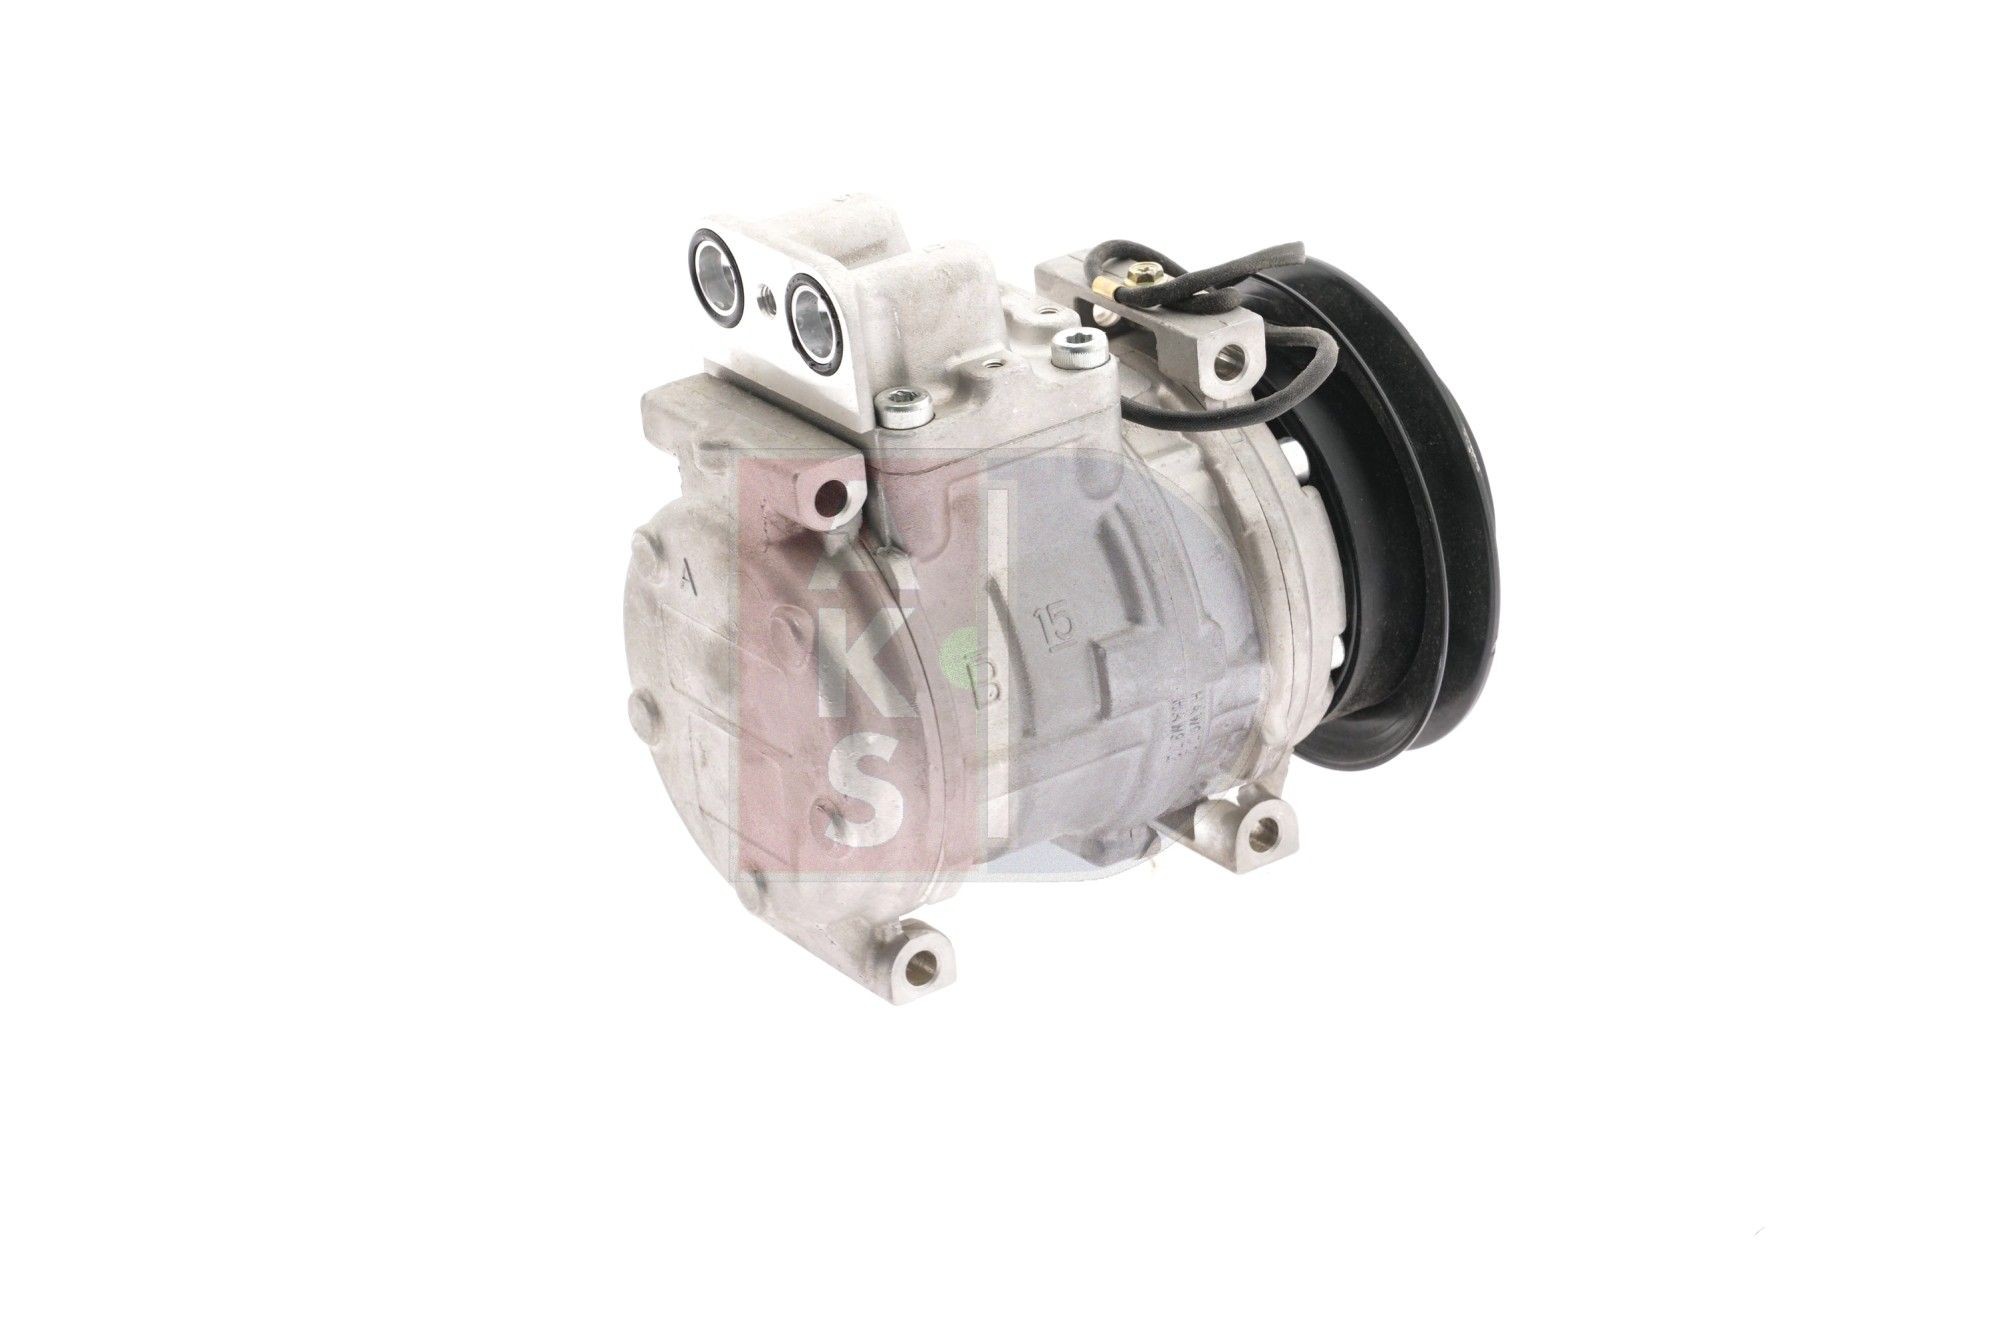 Air conditioning compressor 852056N from AKS DASIS